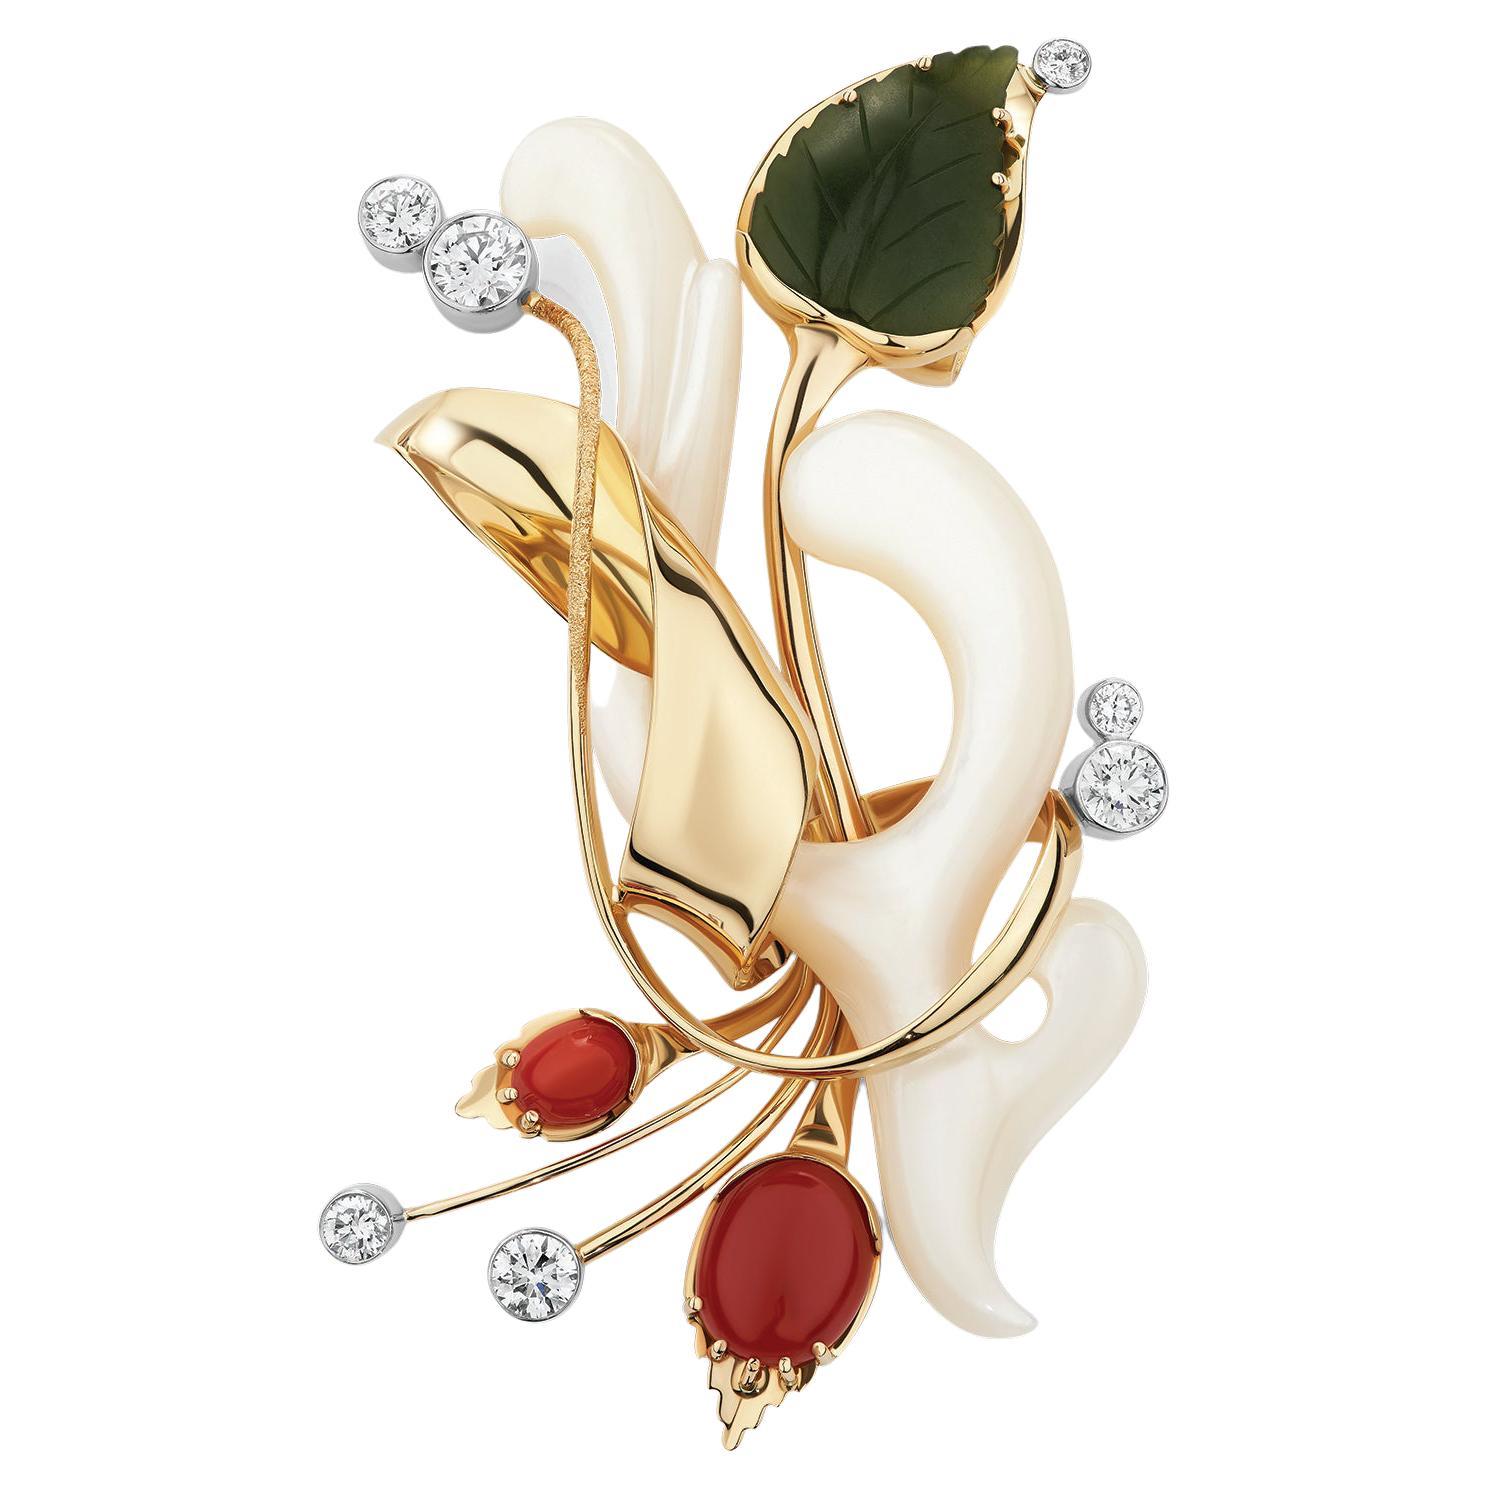 Paul Amey hand crafted 18K, Jade, Natural Red Coral and Diamond "Leaf" Pendant